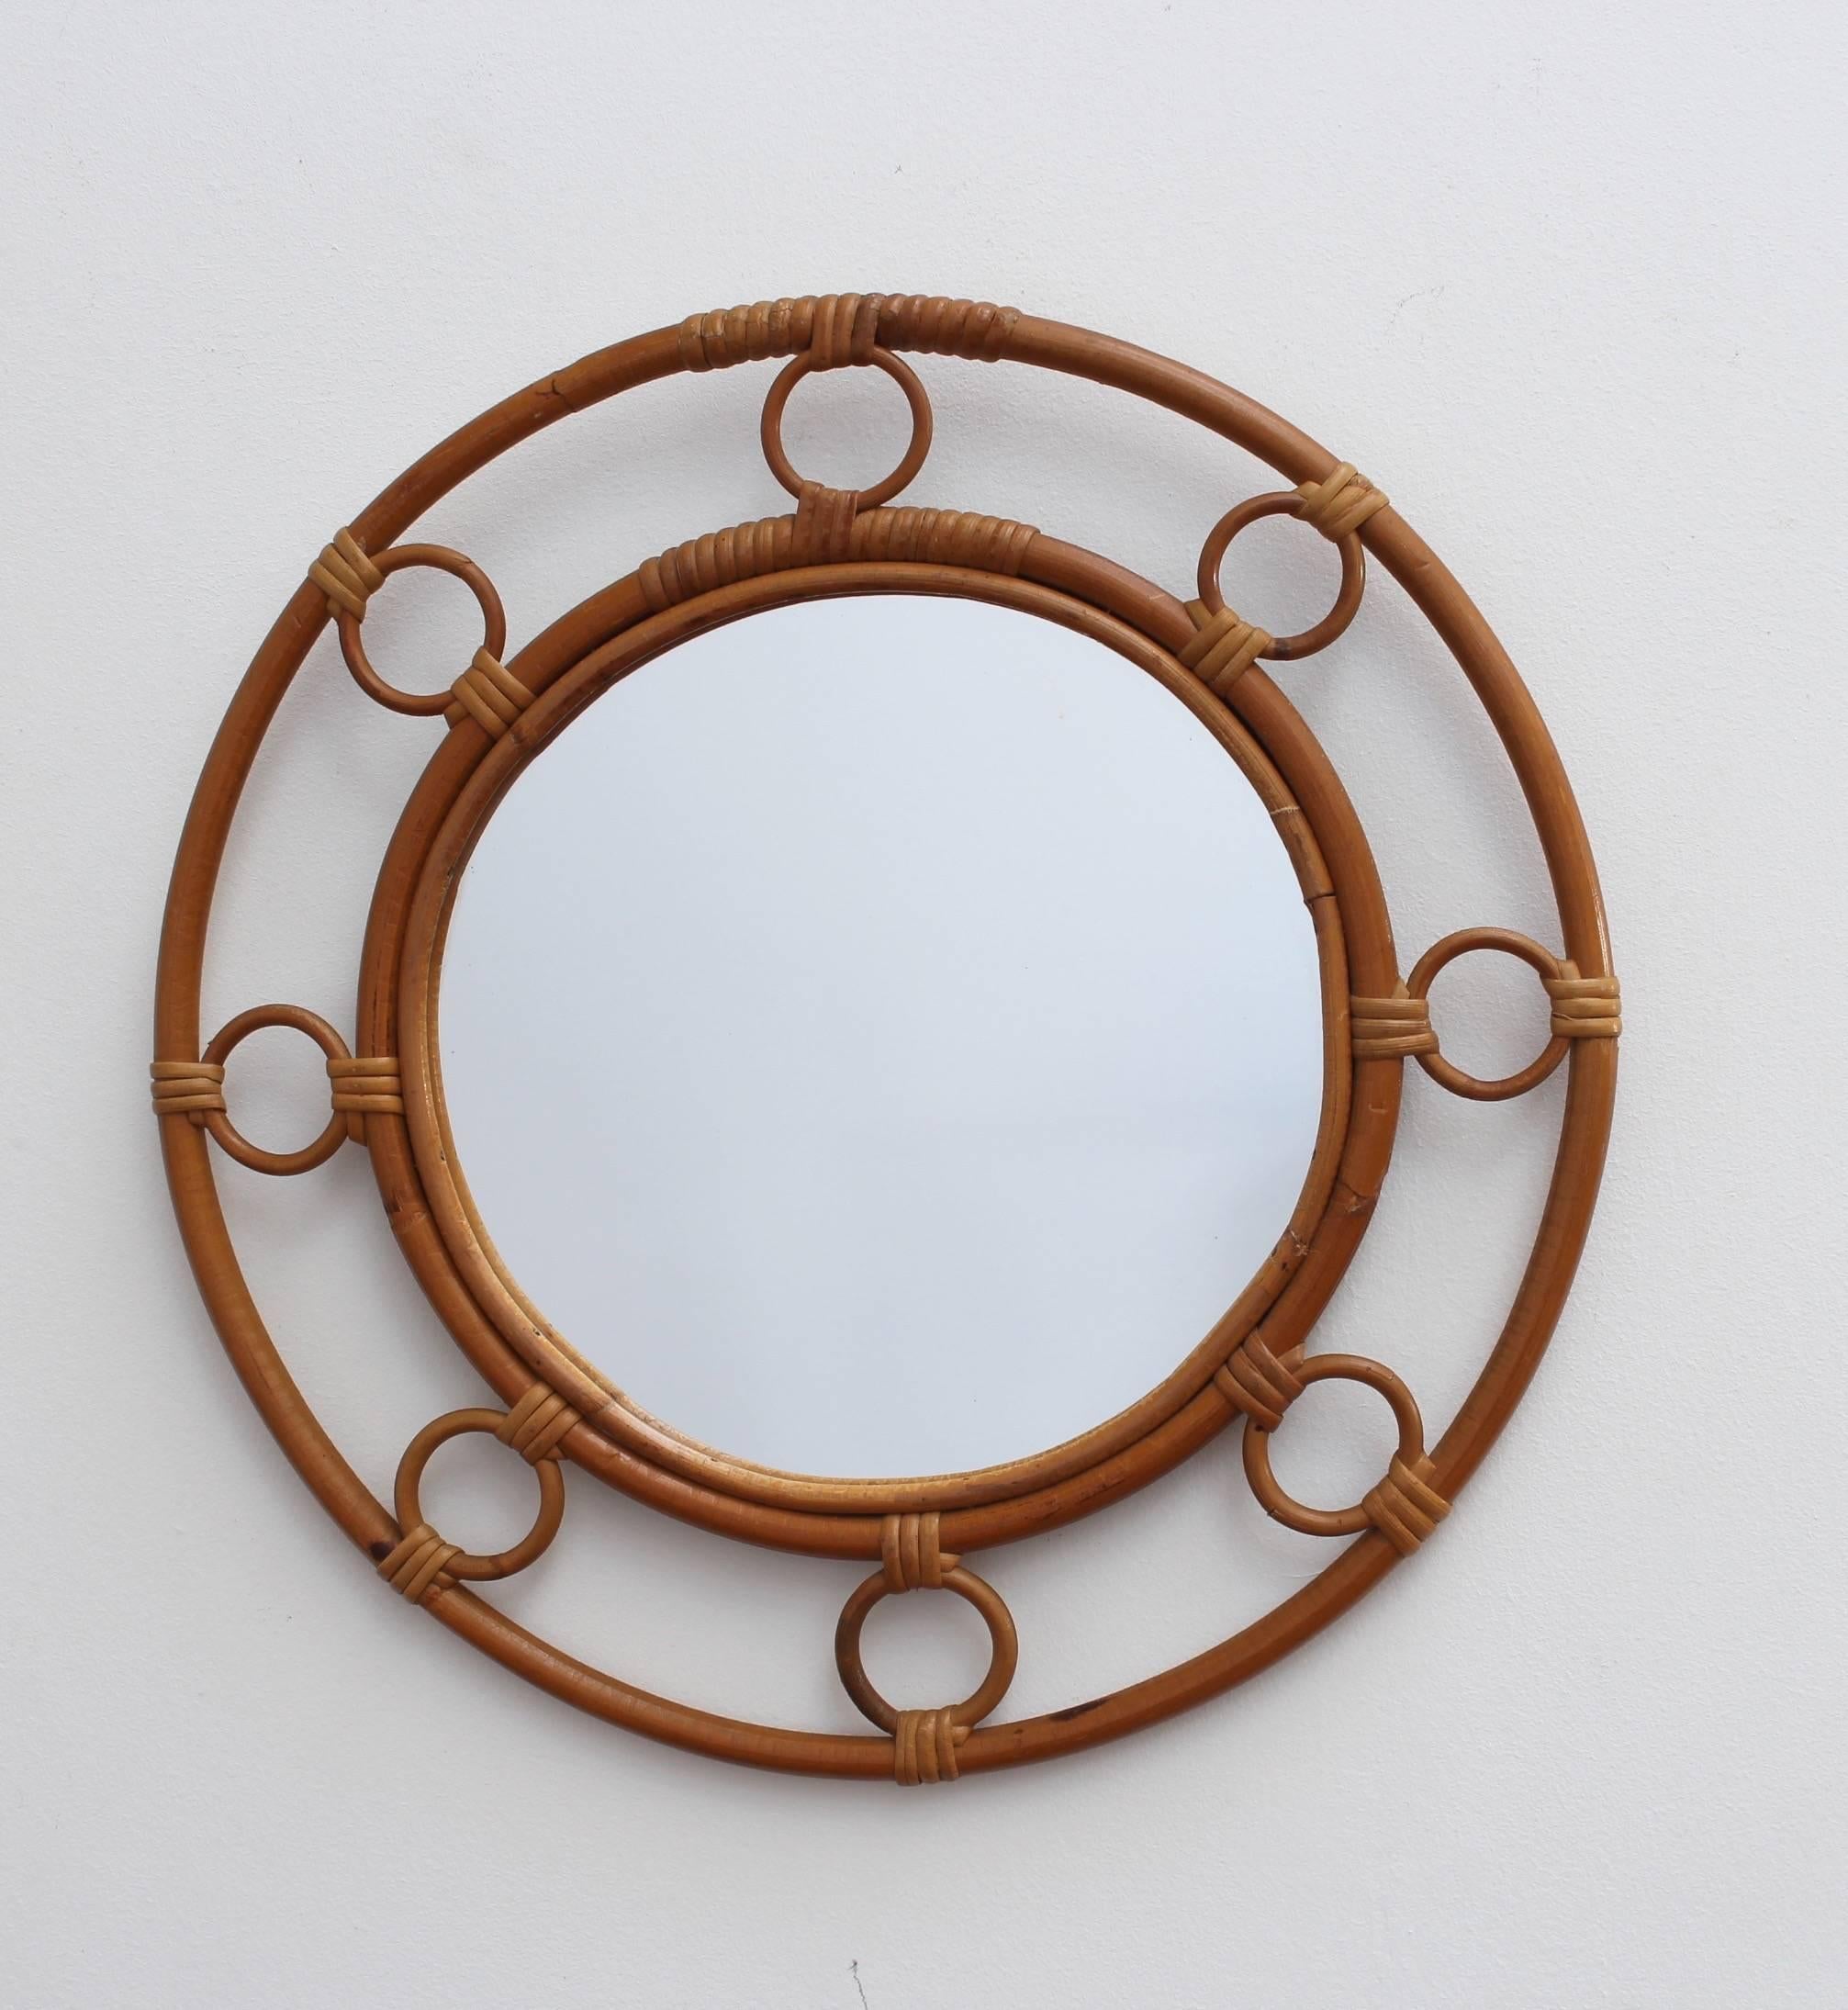 Midcentury French rattan and bamboo mirror, circa 1960s. This vintage bamboo and rattan piece is formed by two concentric circles framing the glass. They are connected by eight small rattan circles creating a chic and appealing vintage mirror. In